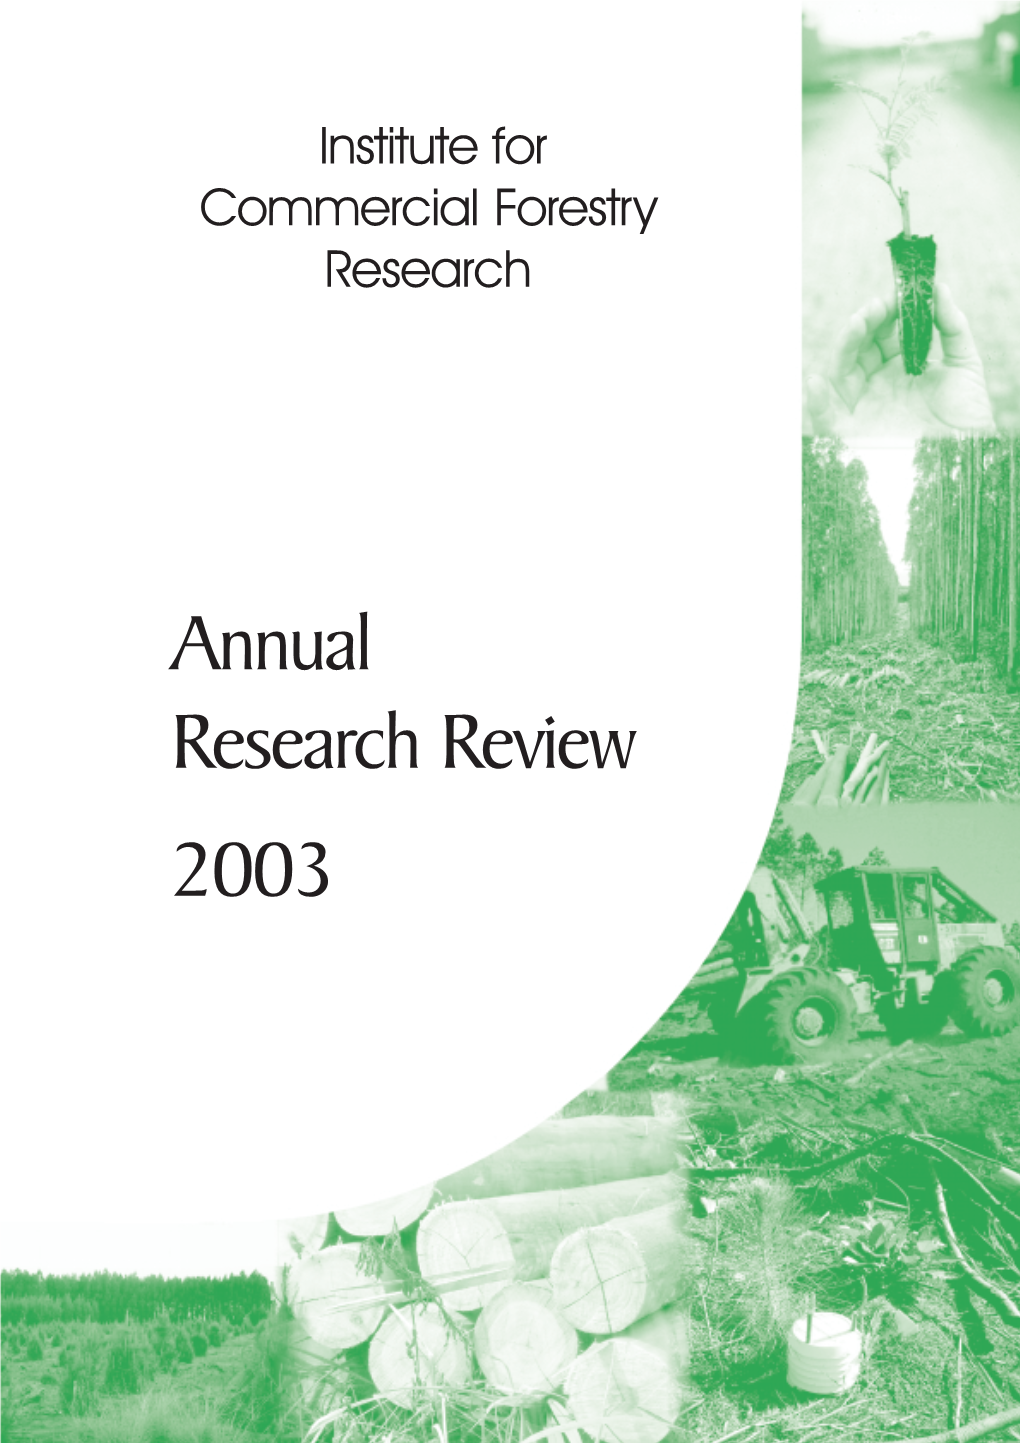 Annual Research Review 2003 OVERVIEW